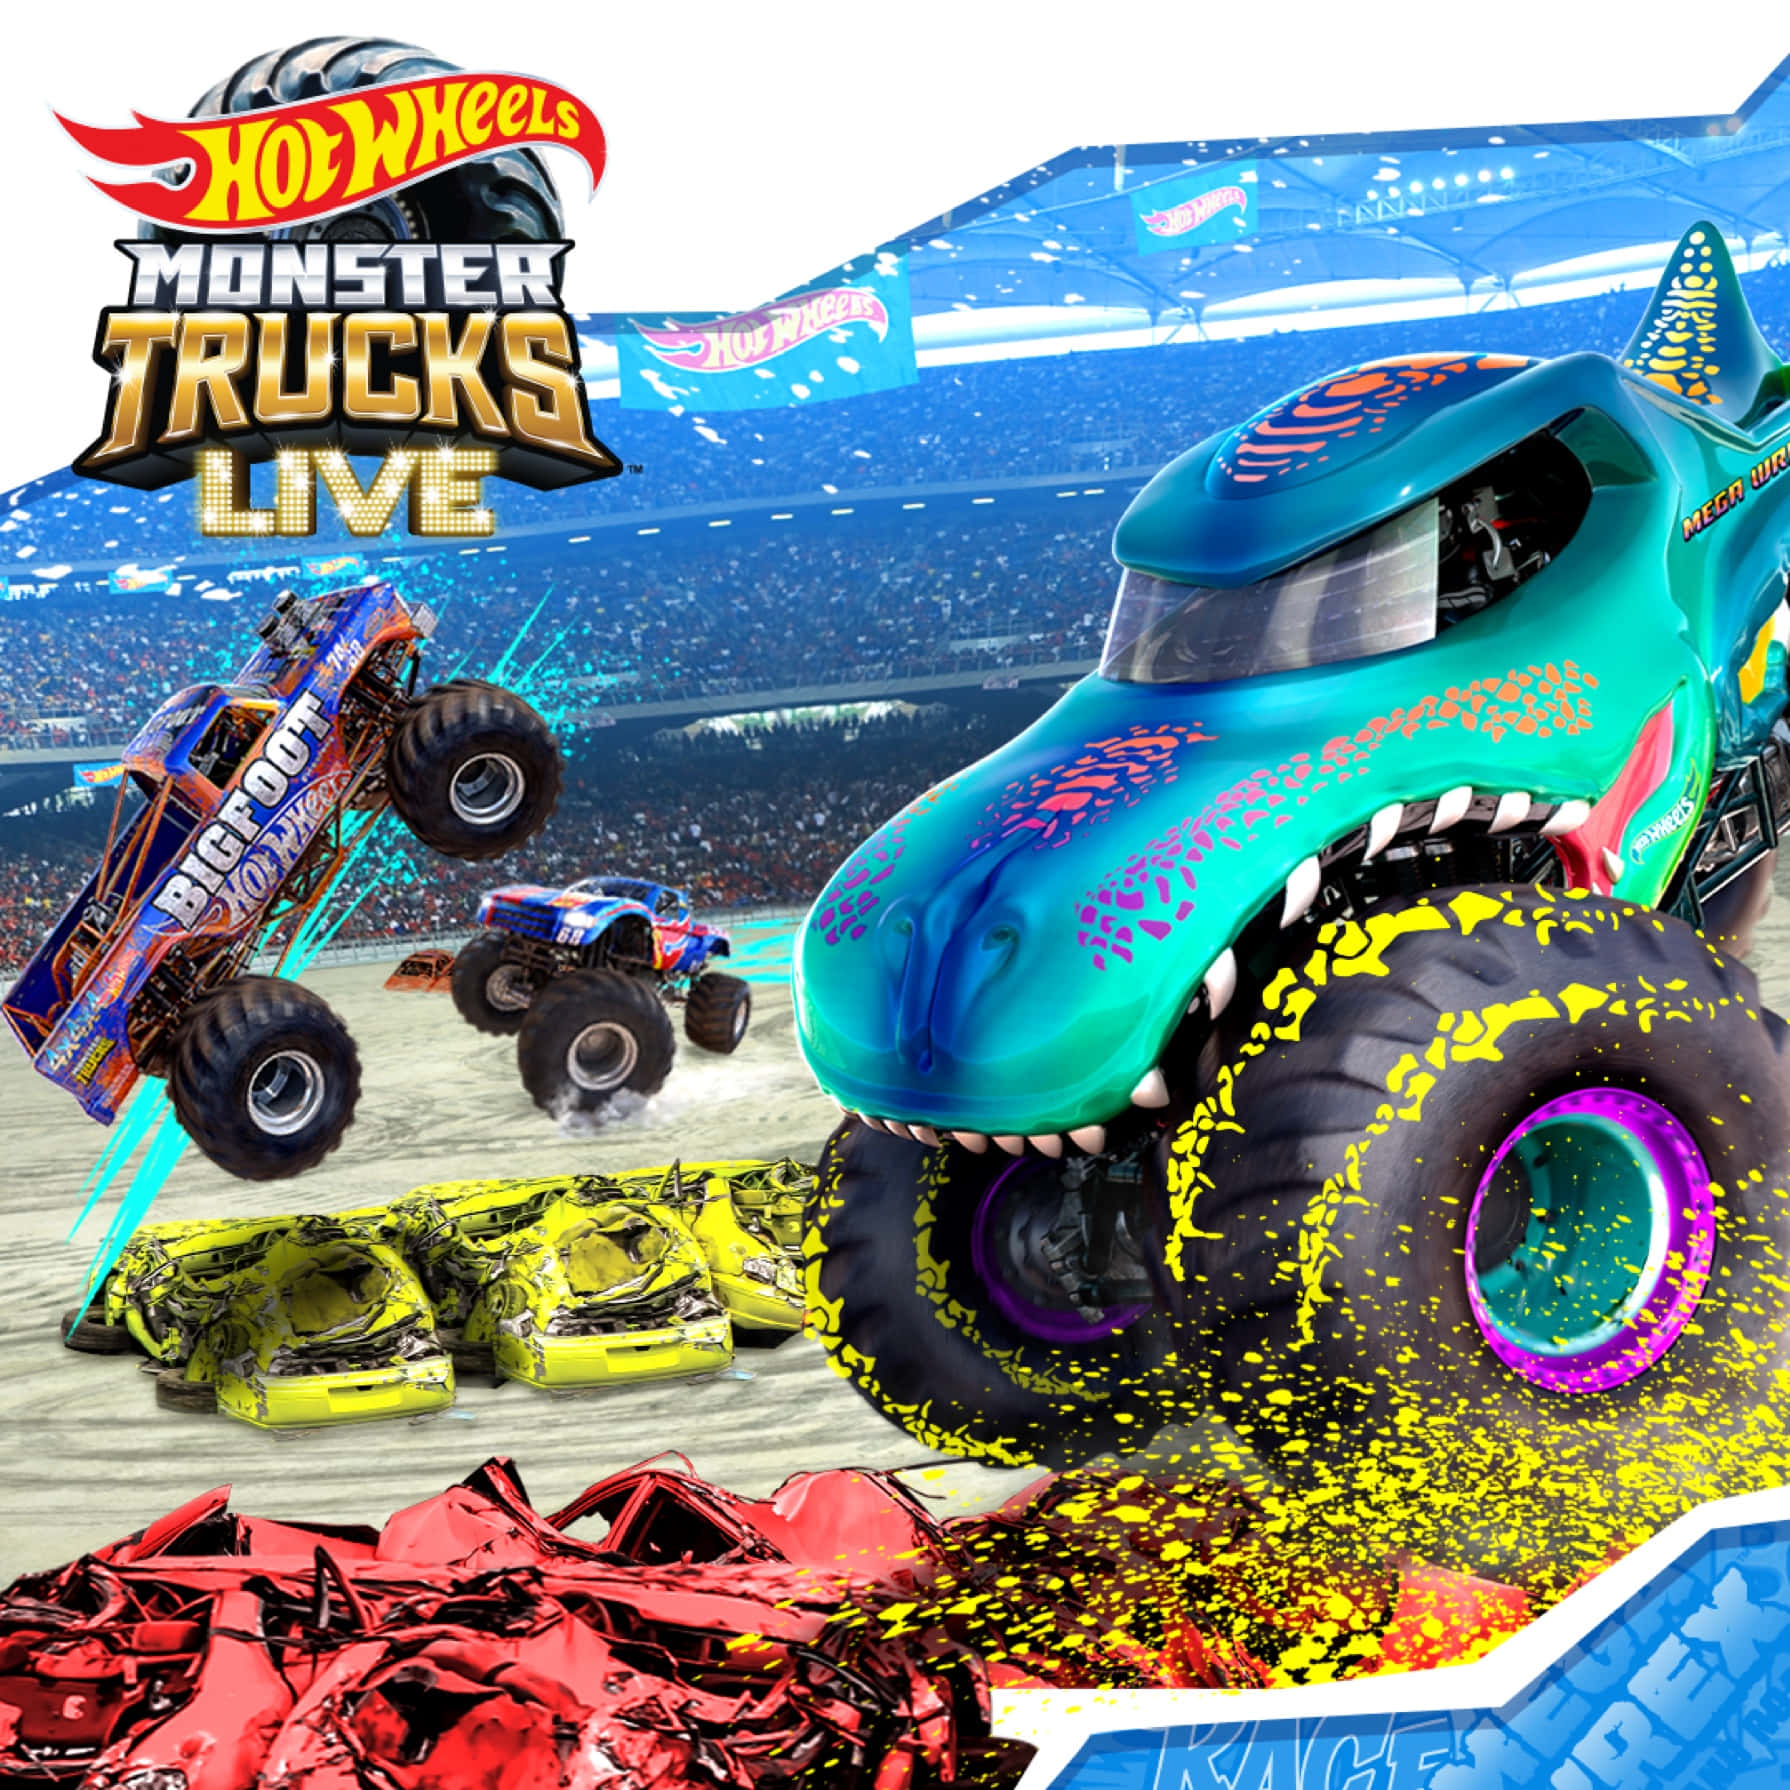 Hot Wheels Monster Trucks Animated Picture